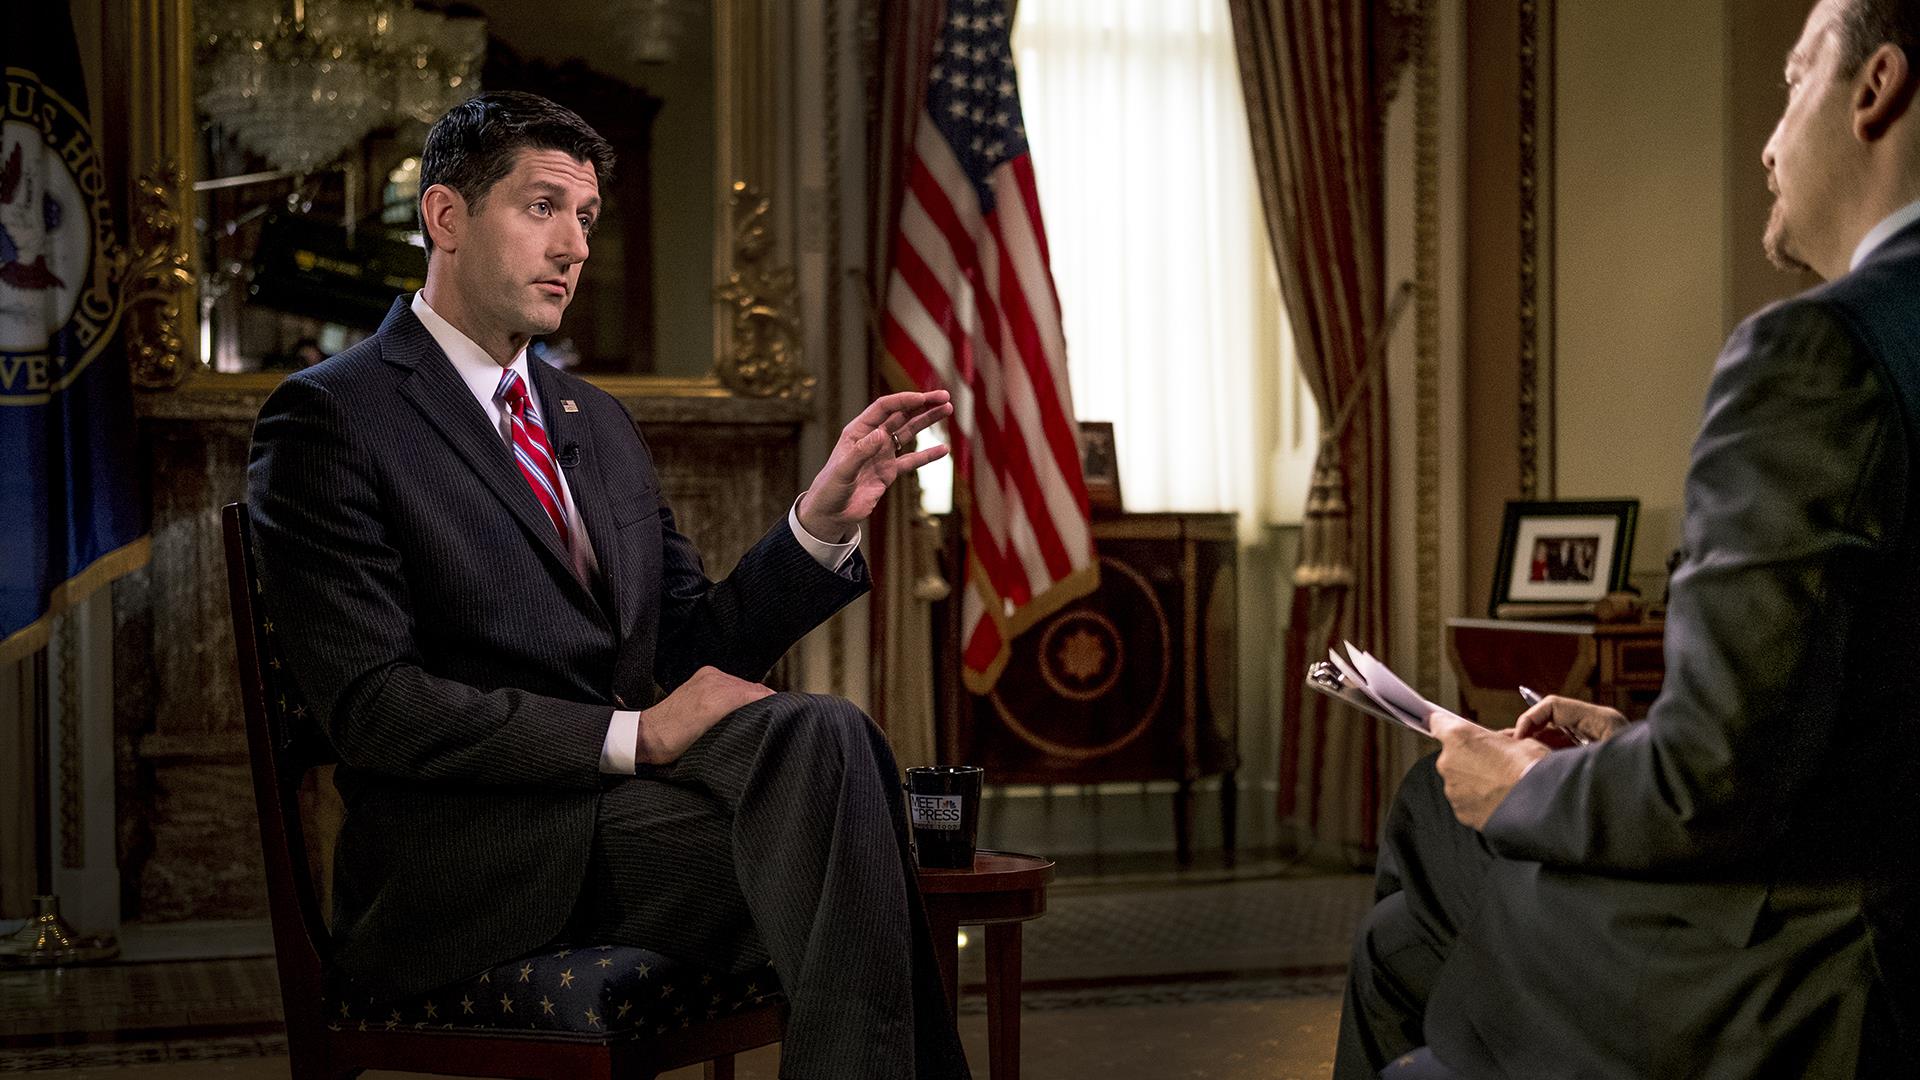 Full Ryan Interview: Refugee Order Rollout 'Could Have Been Done Better'